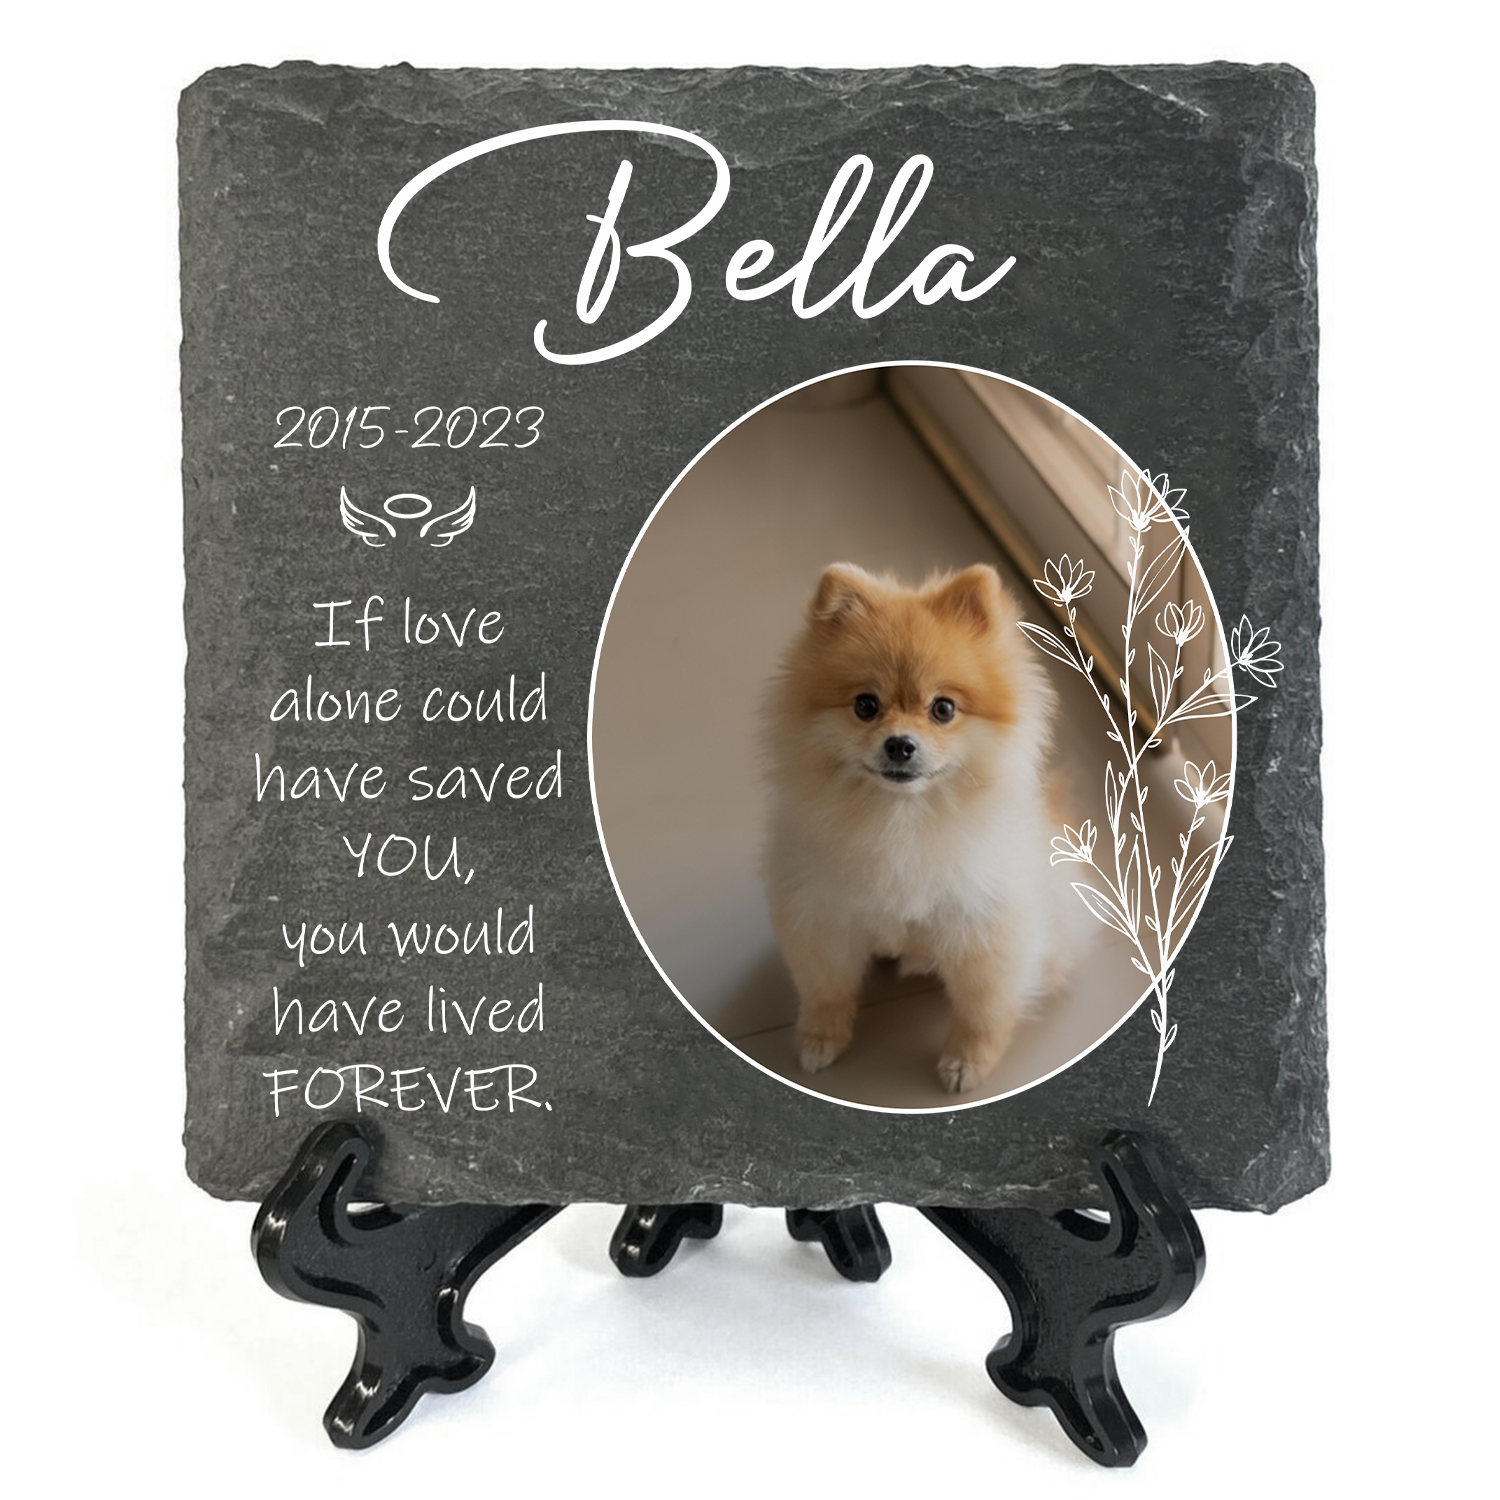 Vintage Wildflower If Love Could Have Saved You Custom Dog Memorial Stone, Pet Memorial Gifts - Personalized Custom Memorial Tomstone